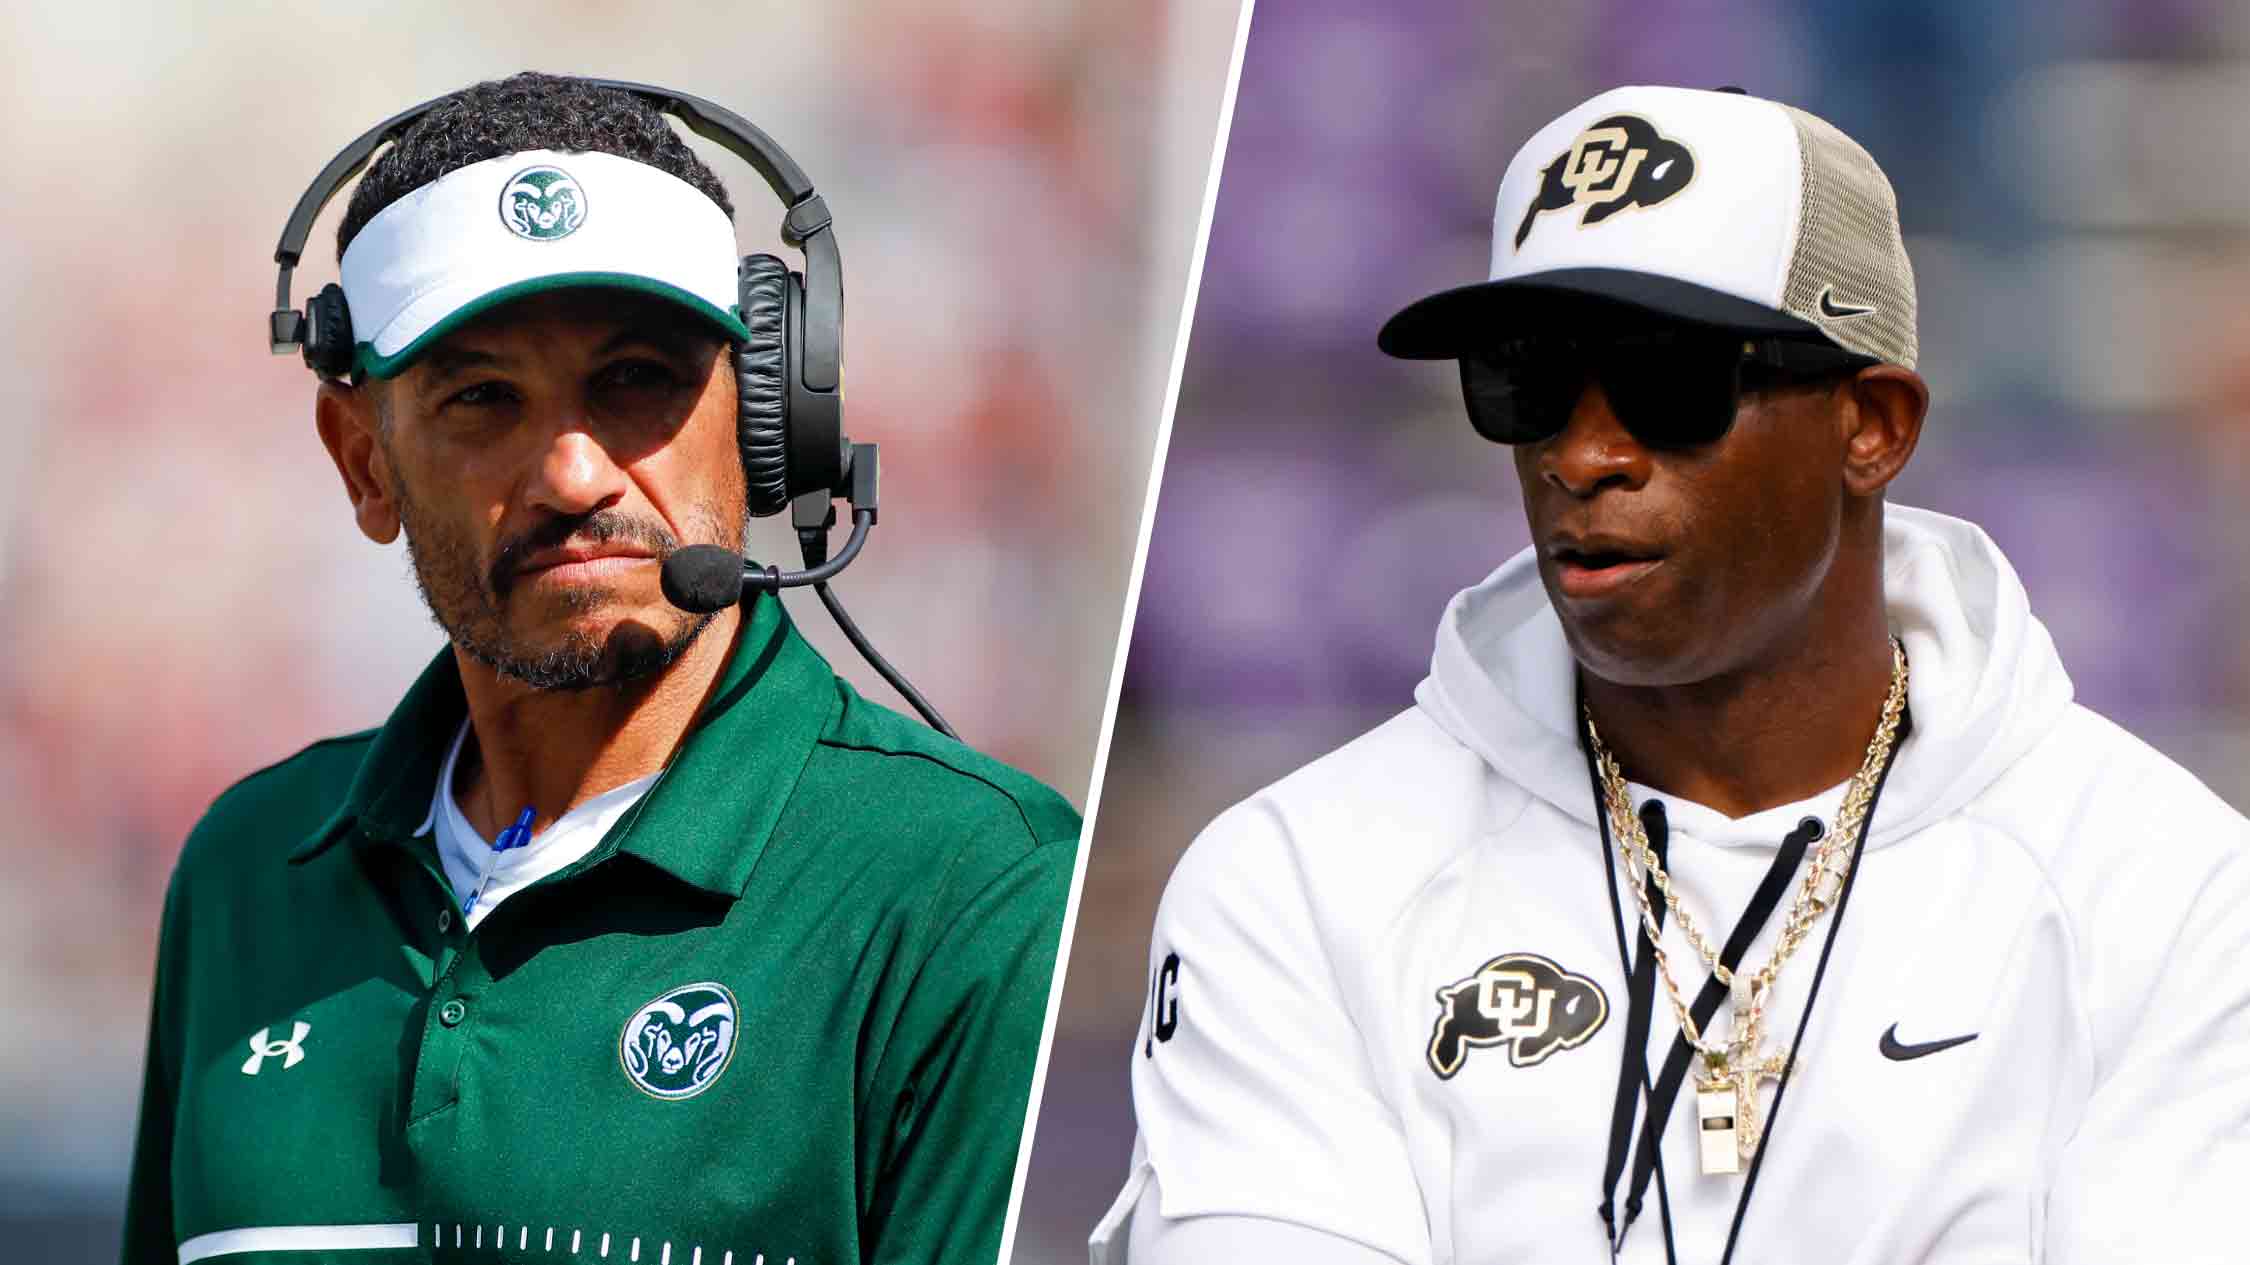 Colorado St coach pokes at Deion Sanders for wearing hat, sunglasses before  game with Colorado